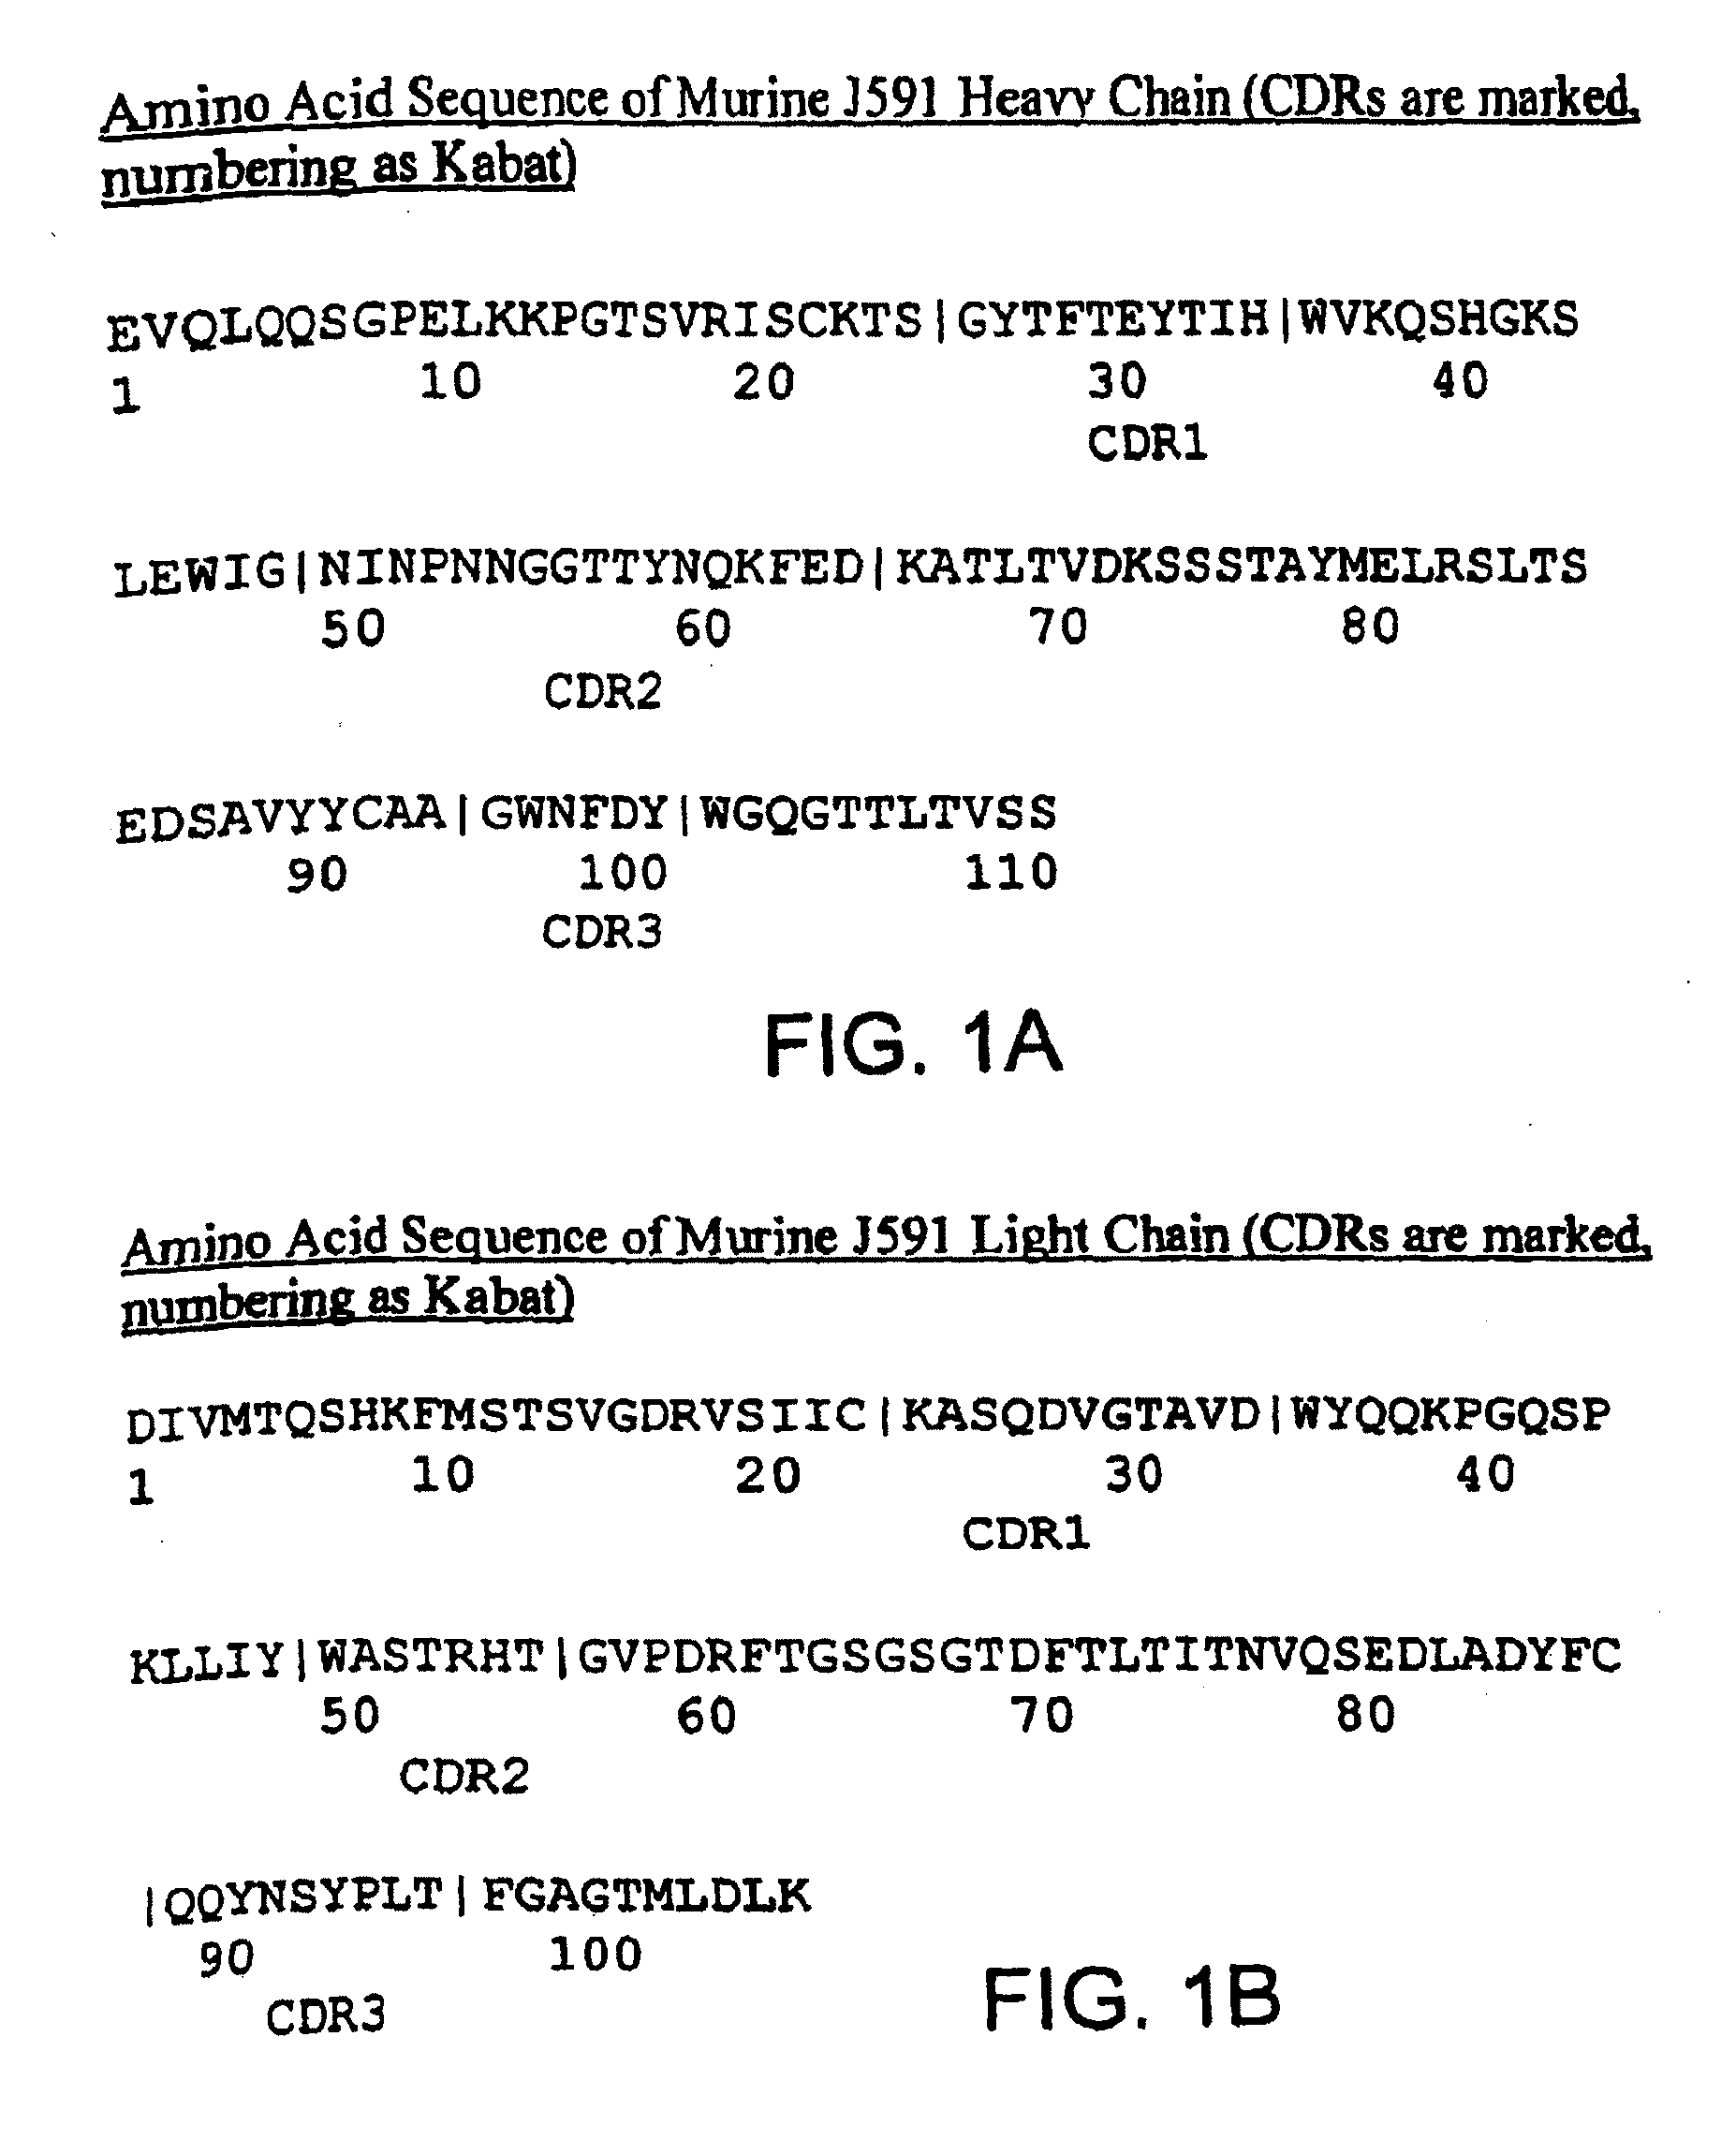 Methods of treating prostate cancer with Anti-prostate specific membrane antigen antibodies